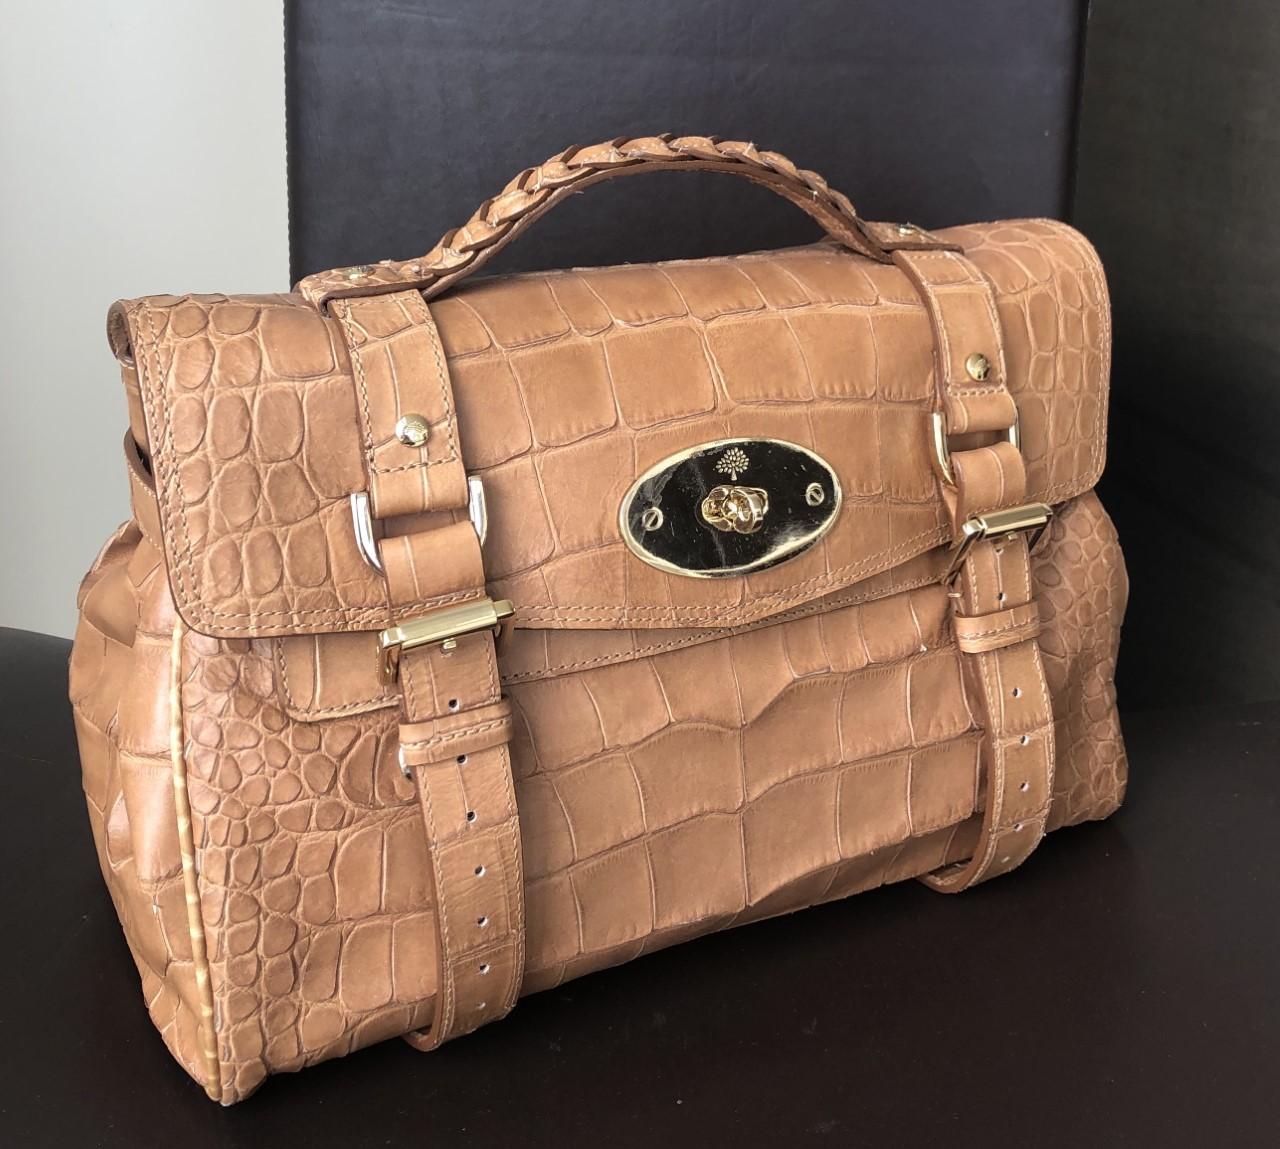 Never-worn Mulberry 'Alexa' medium brown crocodile print satchel bag, with gold hardware. This bag can be worn as a cross-body or a shoulder bag, or as a simple hand-bag. In excellent condition throughout (still with some plastics), the bag has